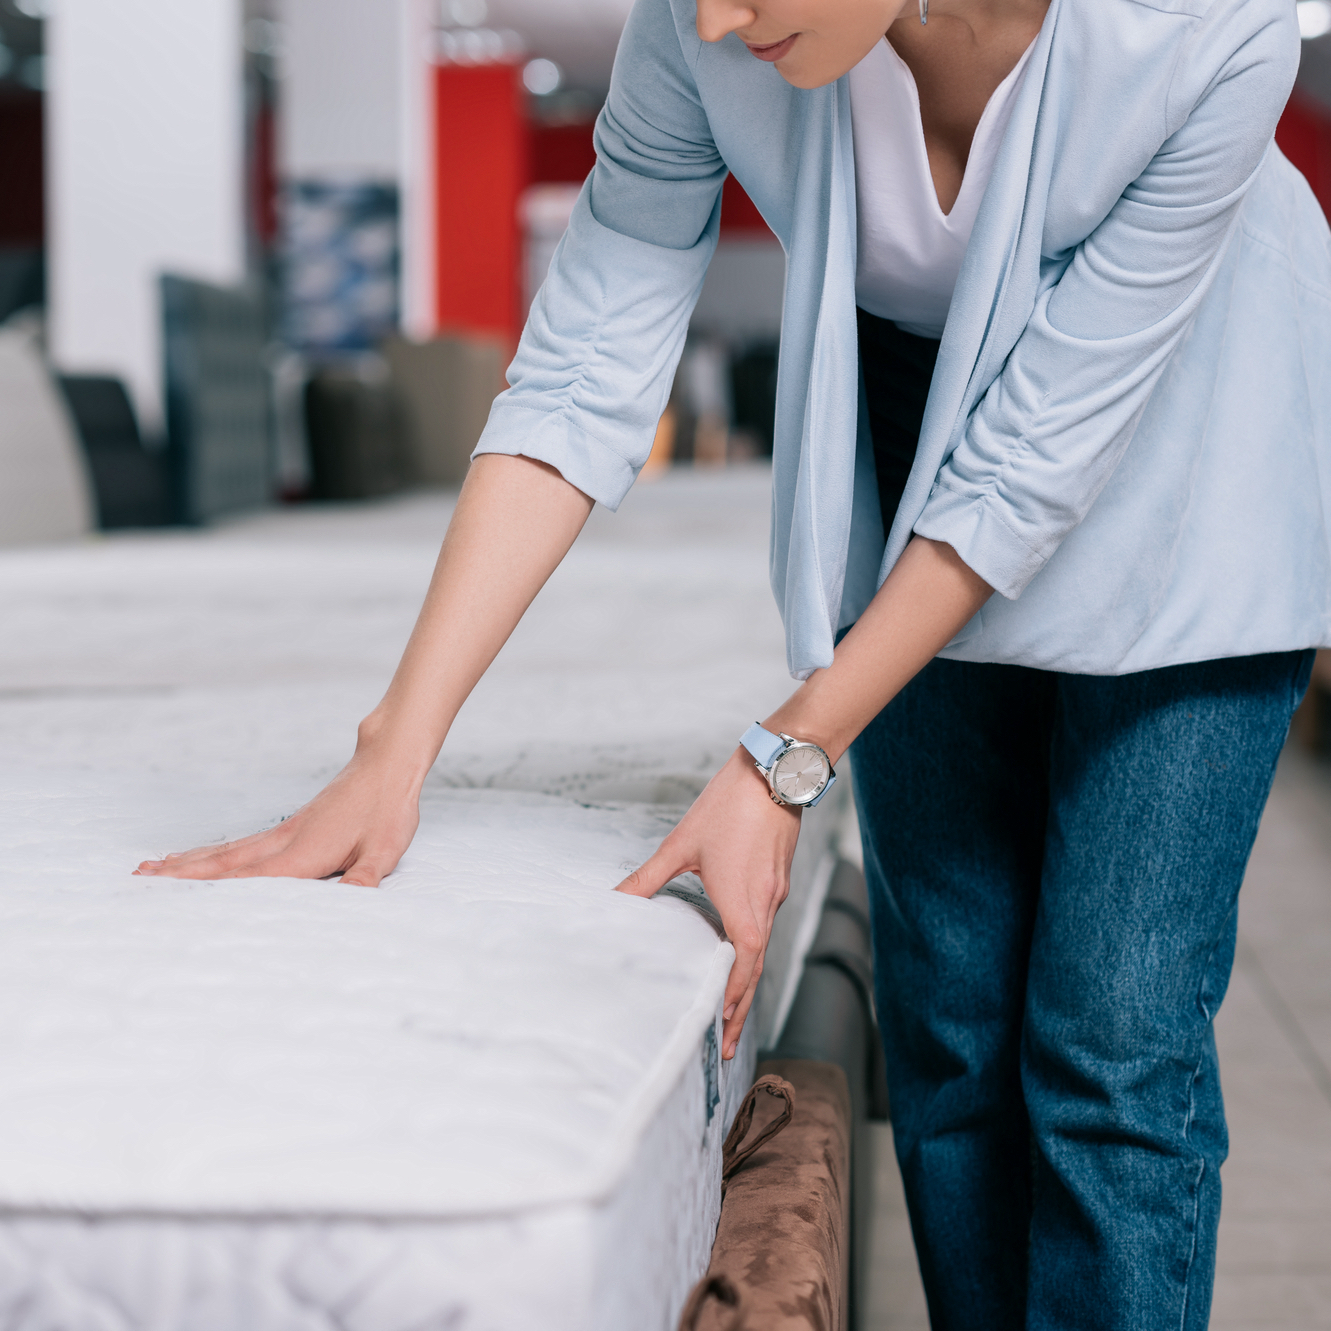 9-Figure Mattress Store Uses OTT Advertising & Geofencing To Sell More Furniture